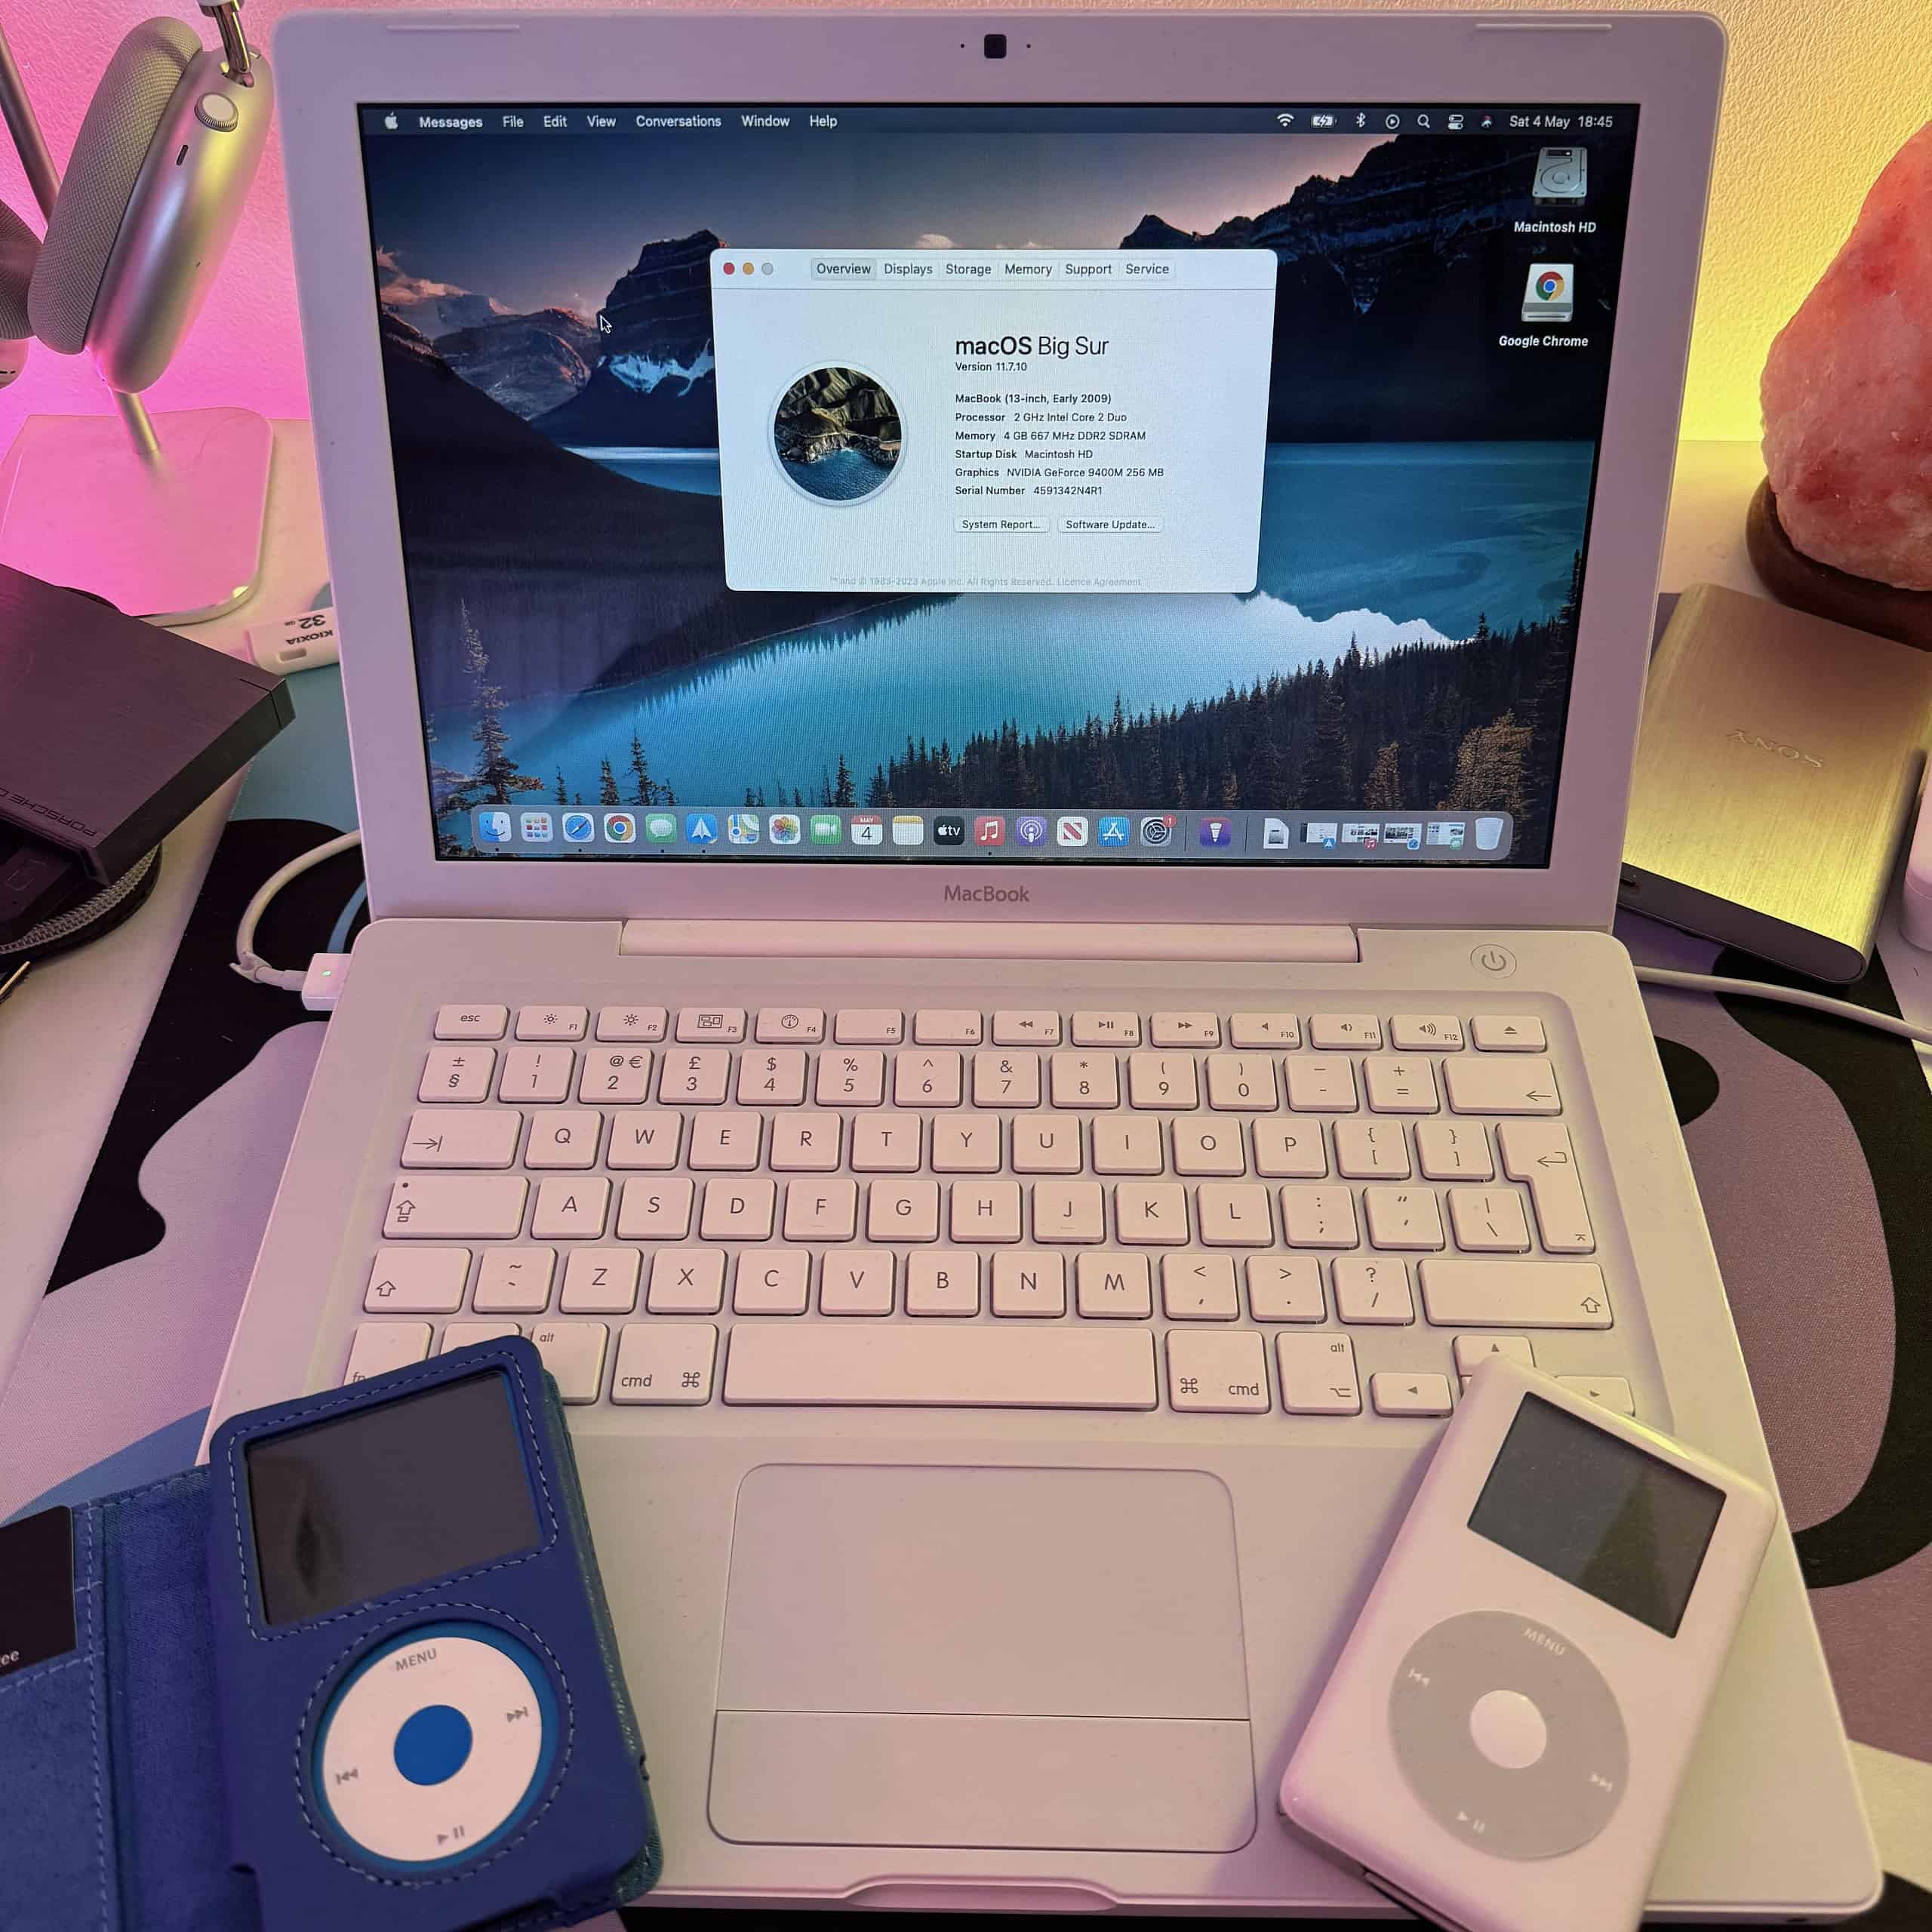 2007 MacBook White running macOS 11 Big Sur with OCLP and two vintage iPods over its palm rest